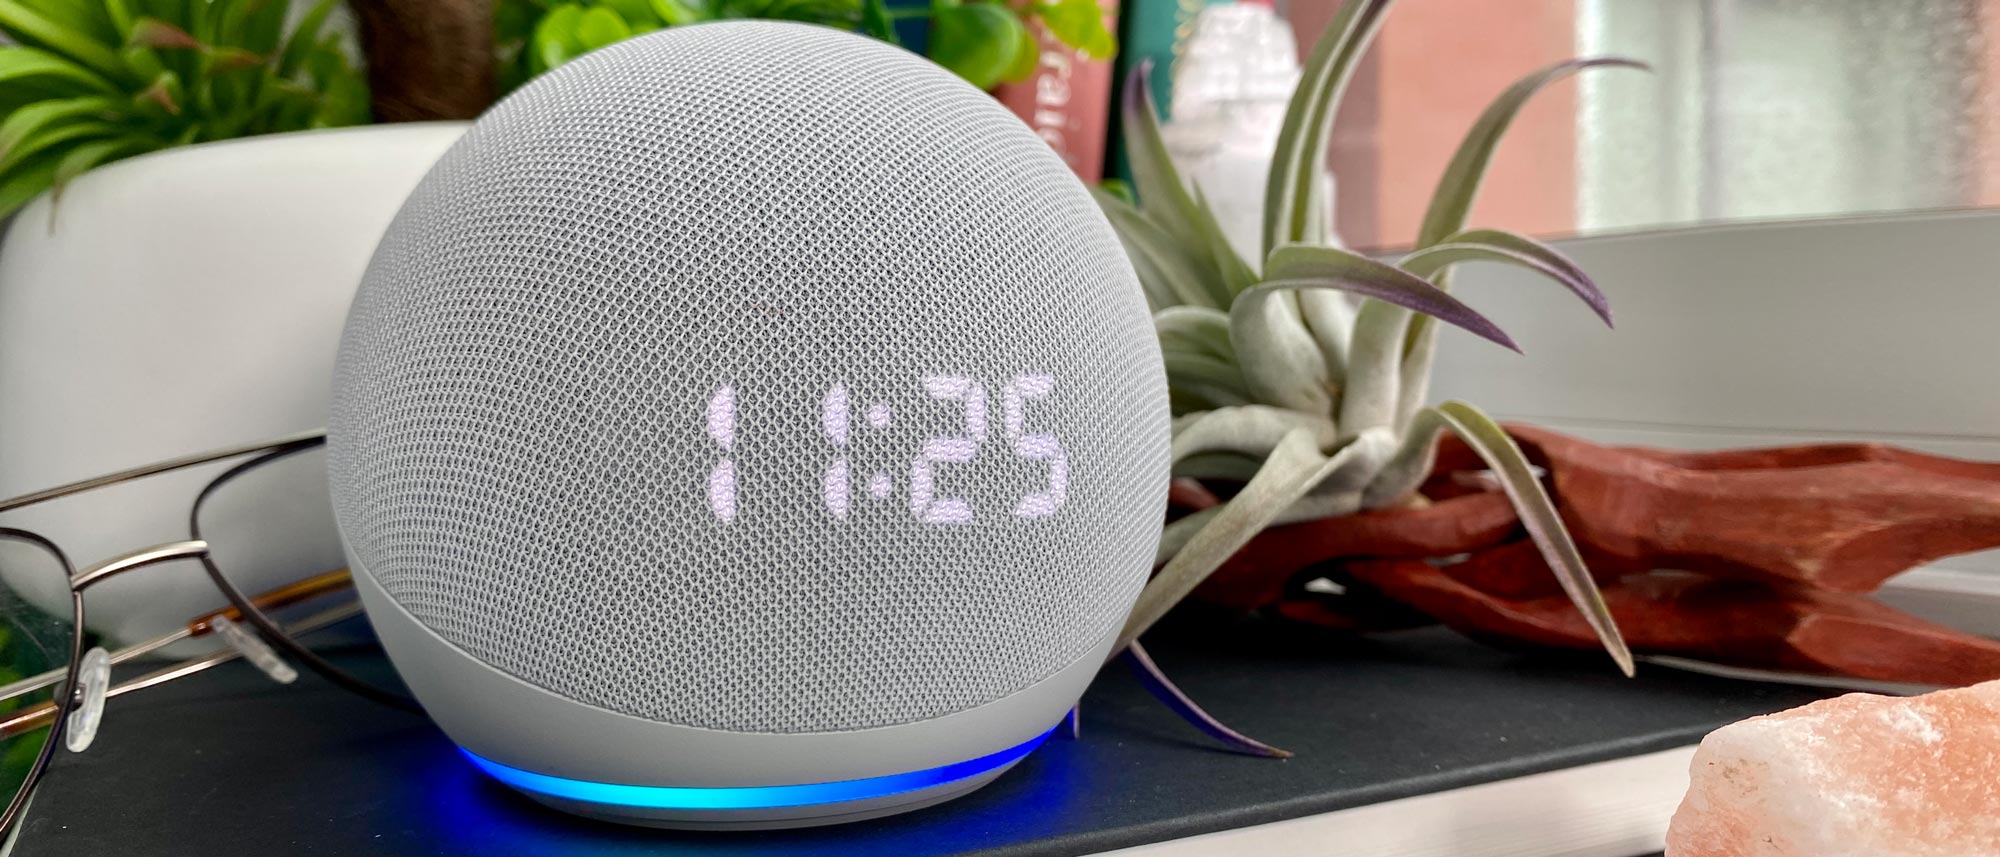 How to Set Up  Echo Dot or Echo Dot with Clock-  Alexa 